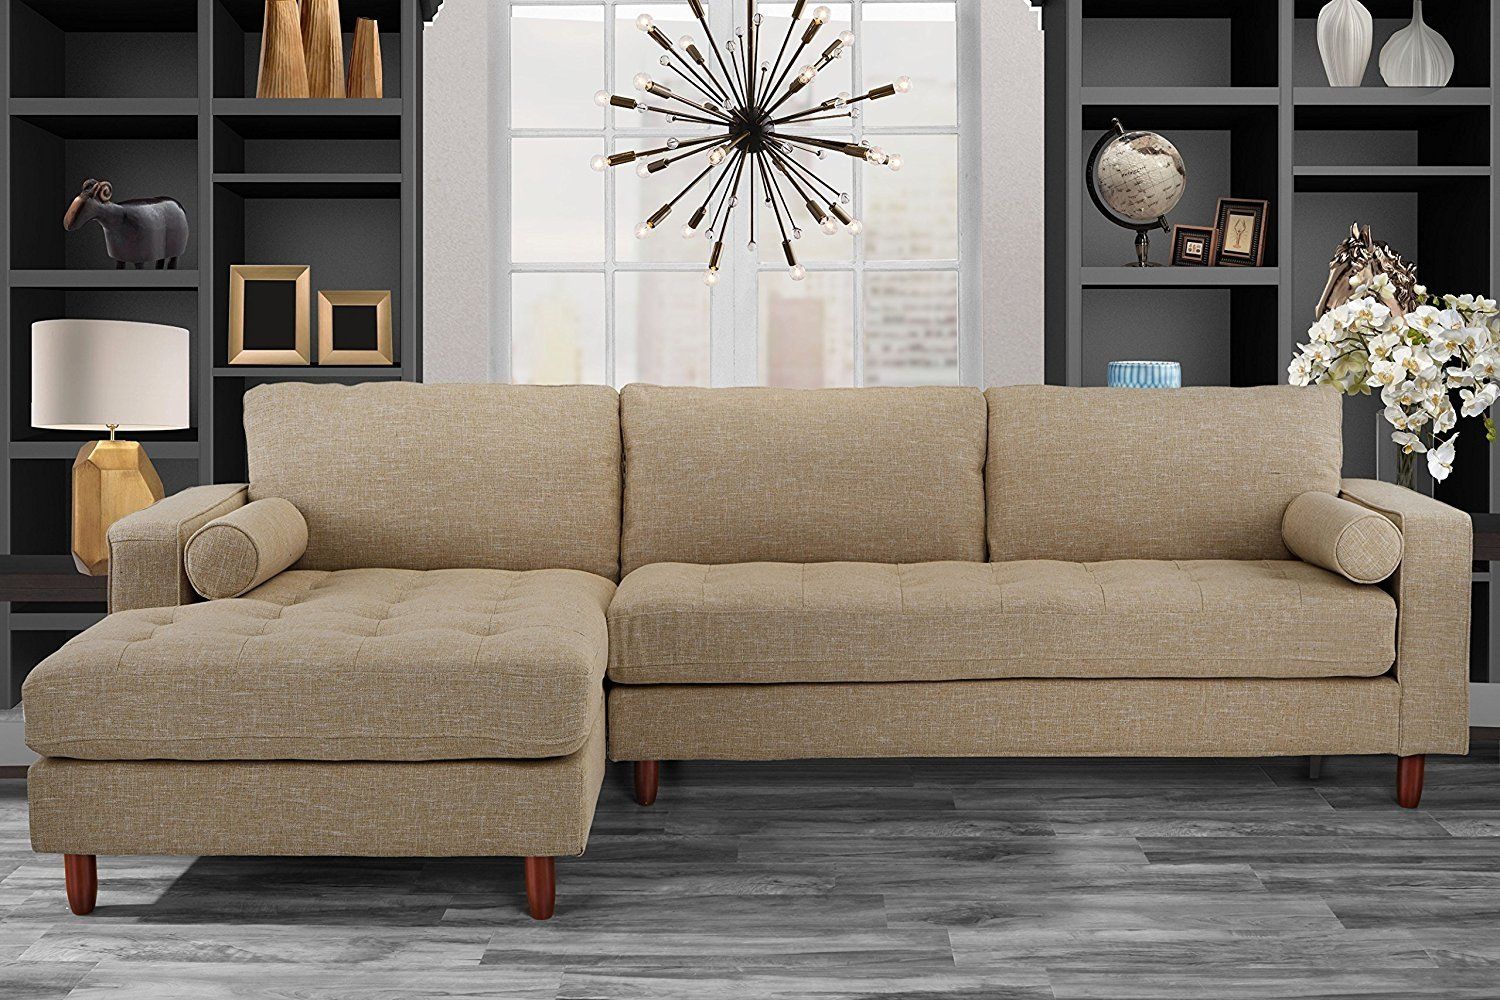 Mid Century Modern Tufted Fabric Sectional Sofa, L Shape Couch Beige For Beige L Shaped Sectional Sofas (Gallery 3 of 20)